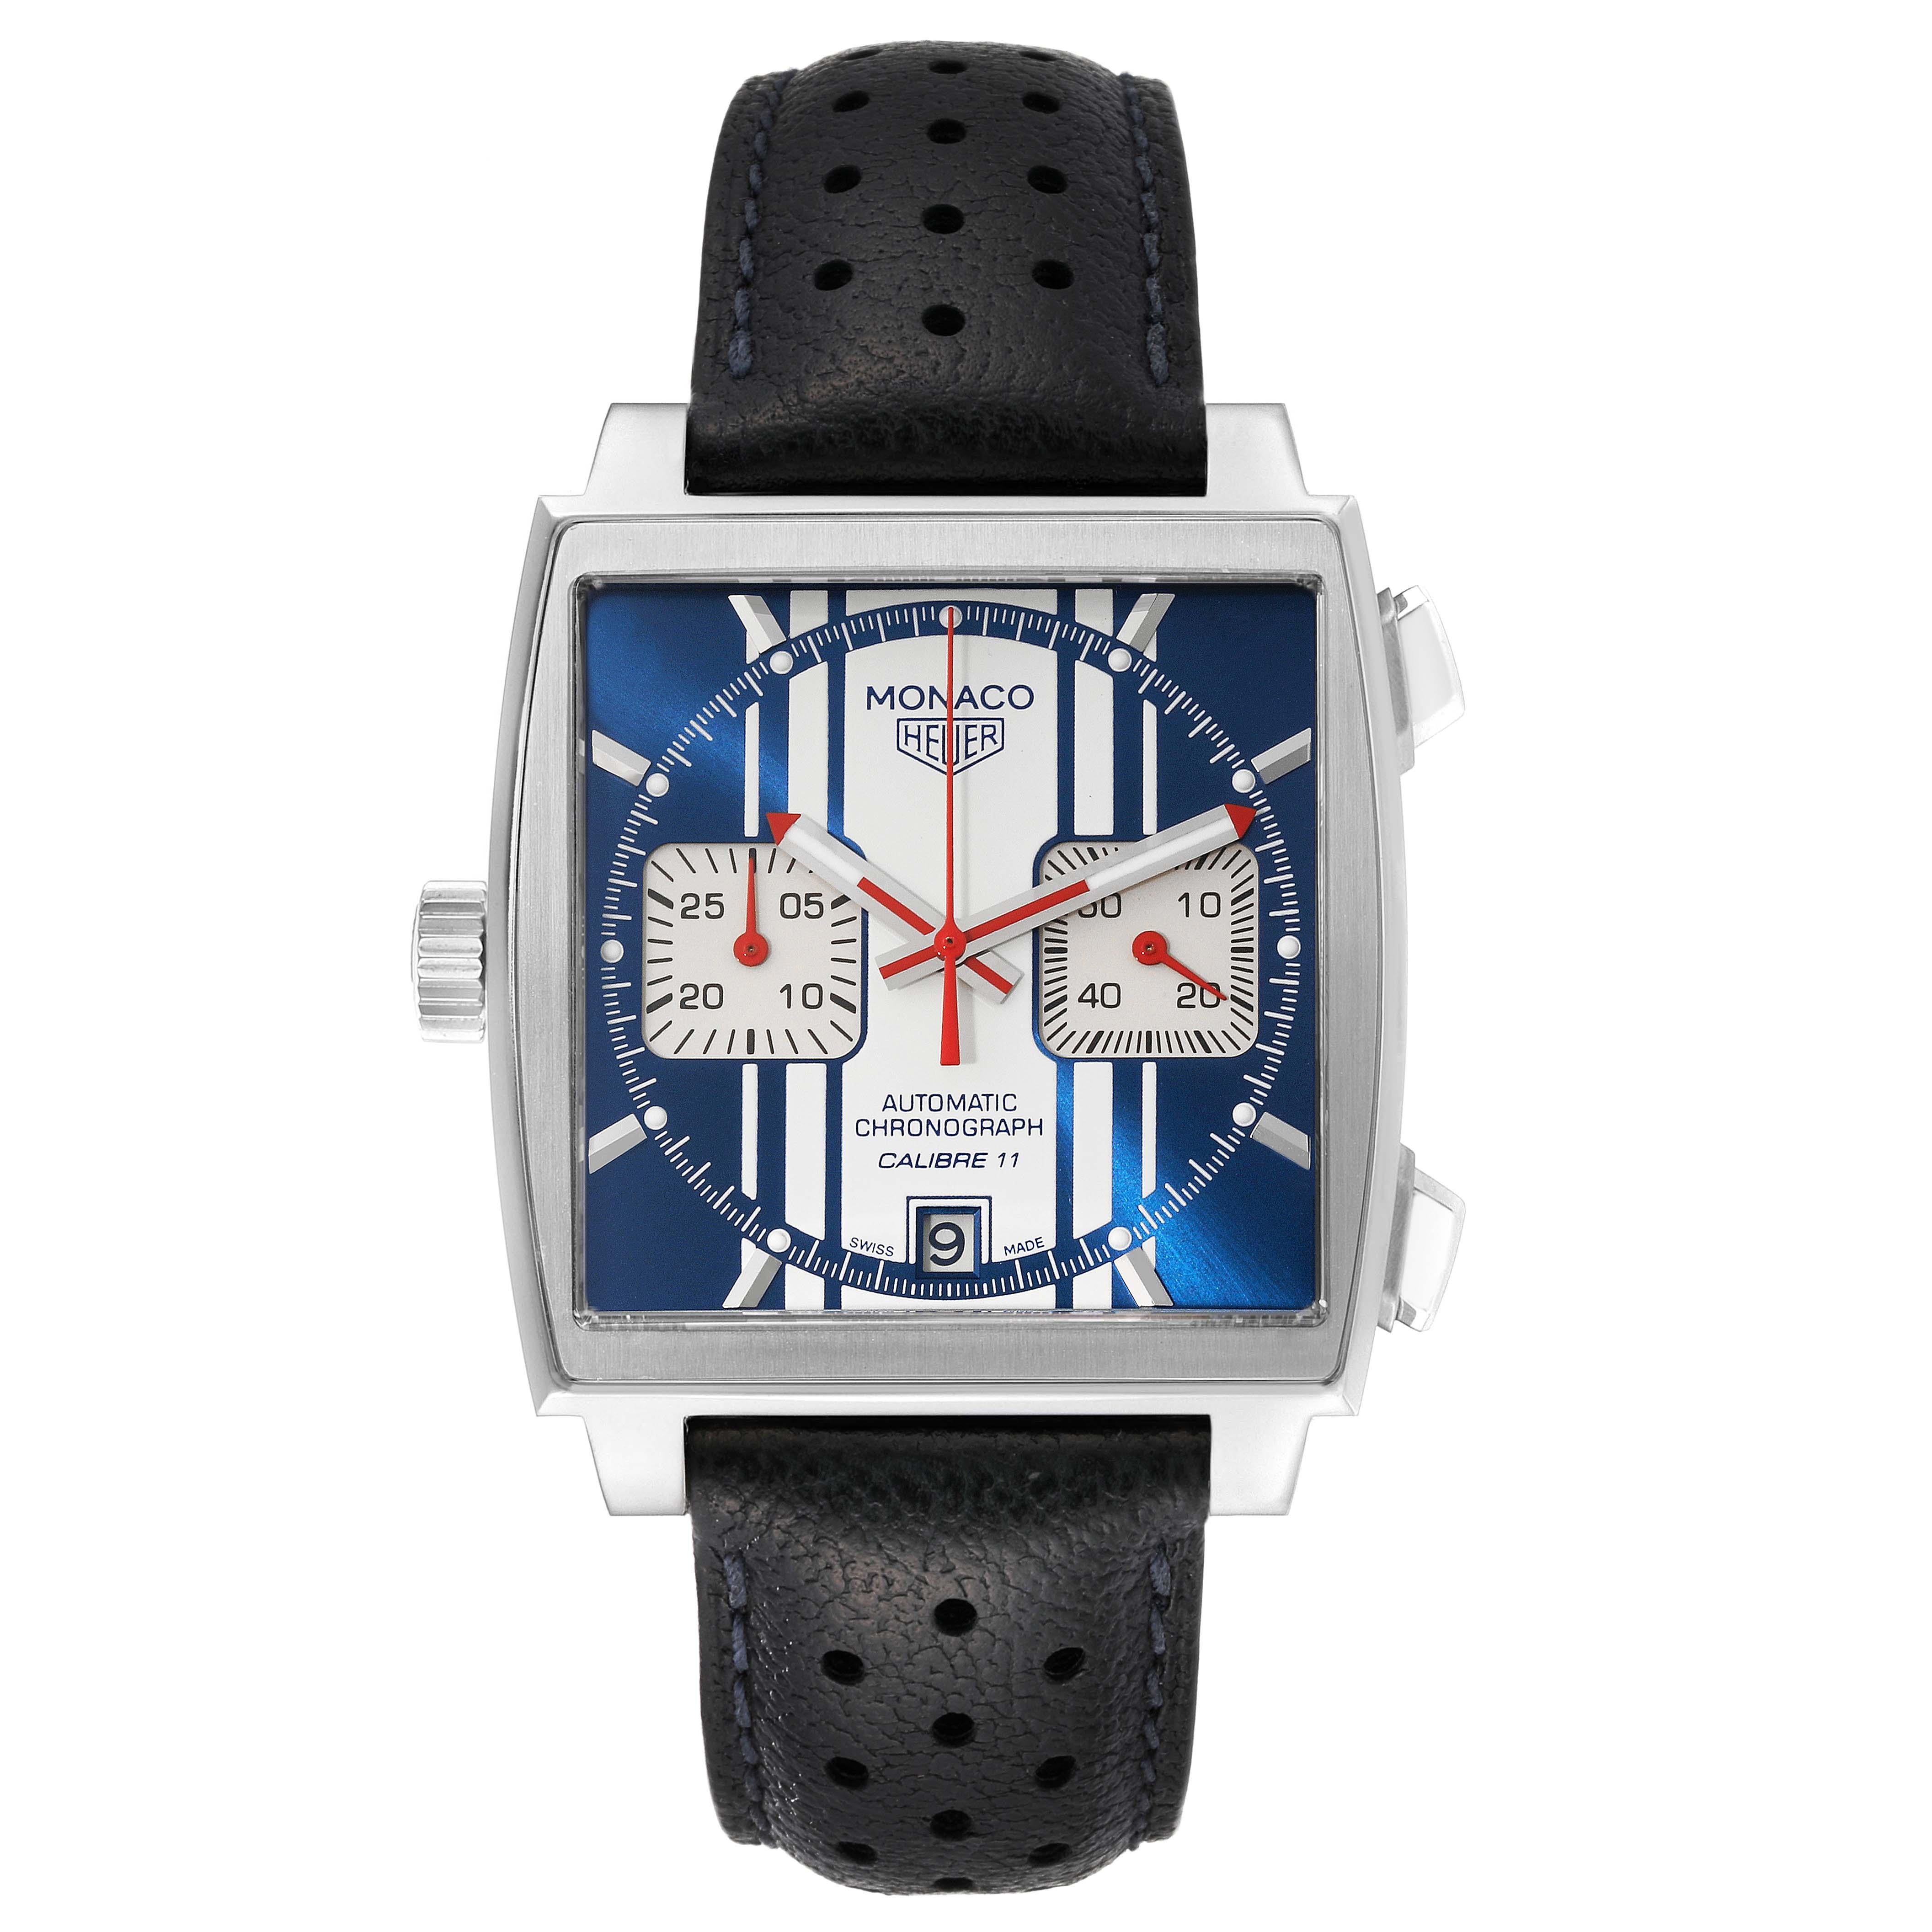 Tag Heuer Monaco McQueen Limited Edition Steel Mens Watch CAW211D Box Card In Excellent Condition For Sale In Atlanta, GA